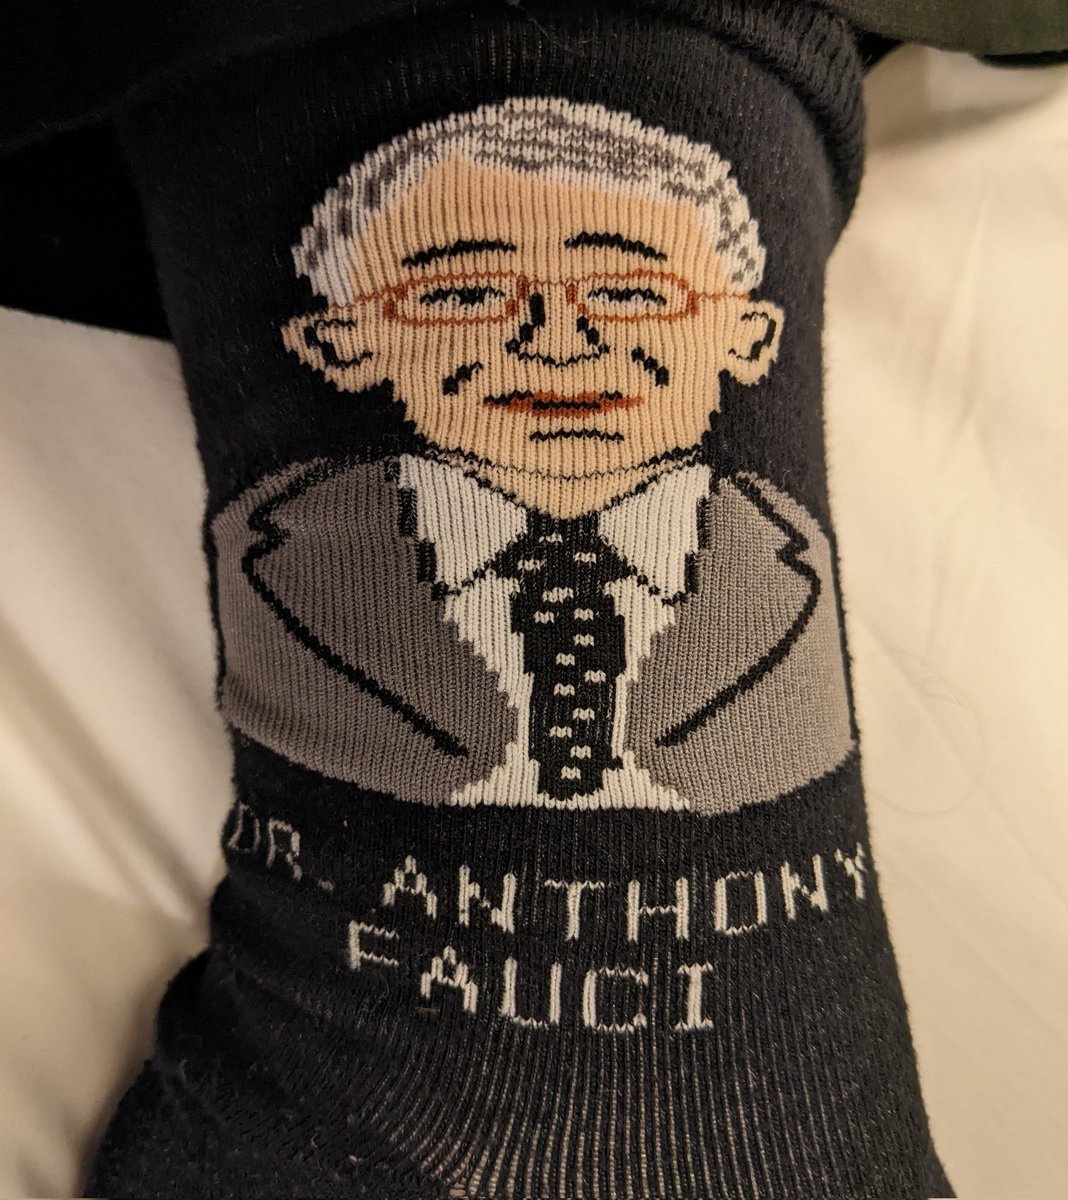 Even my socks are @ASTMH - ready. #TropMed22